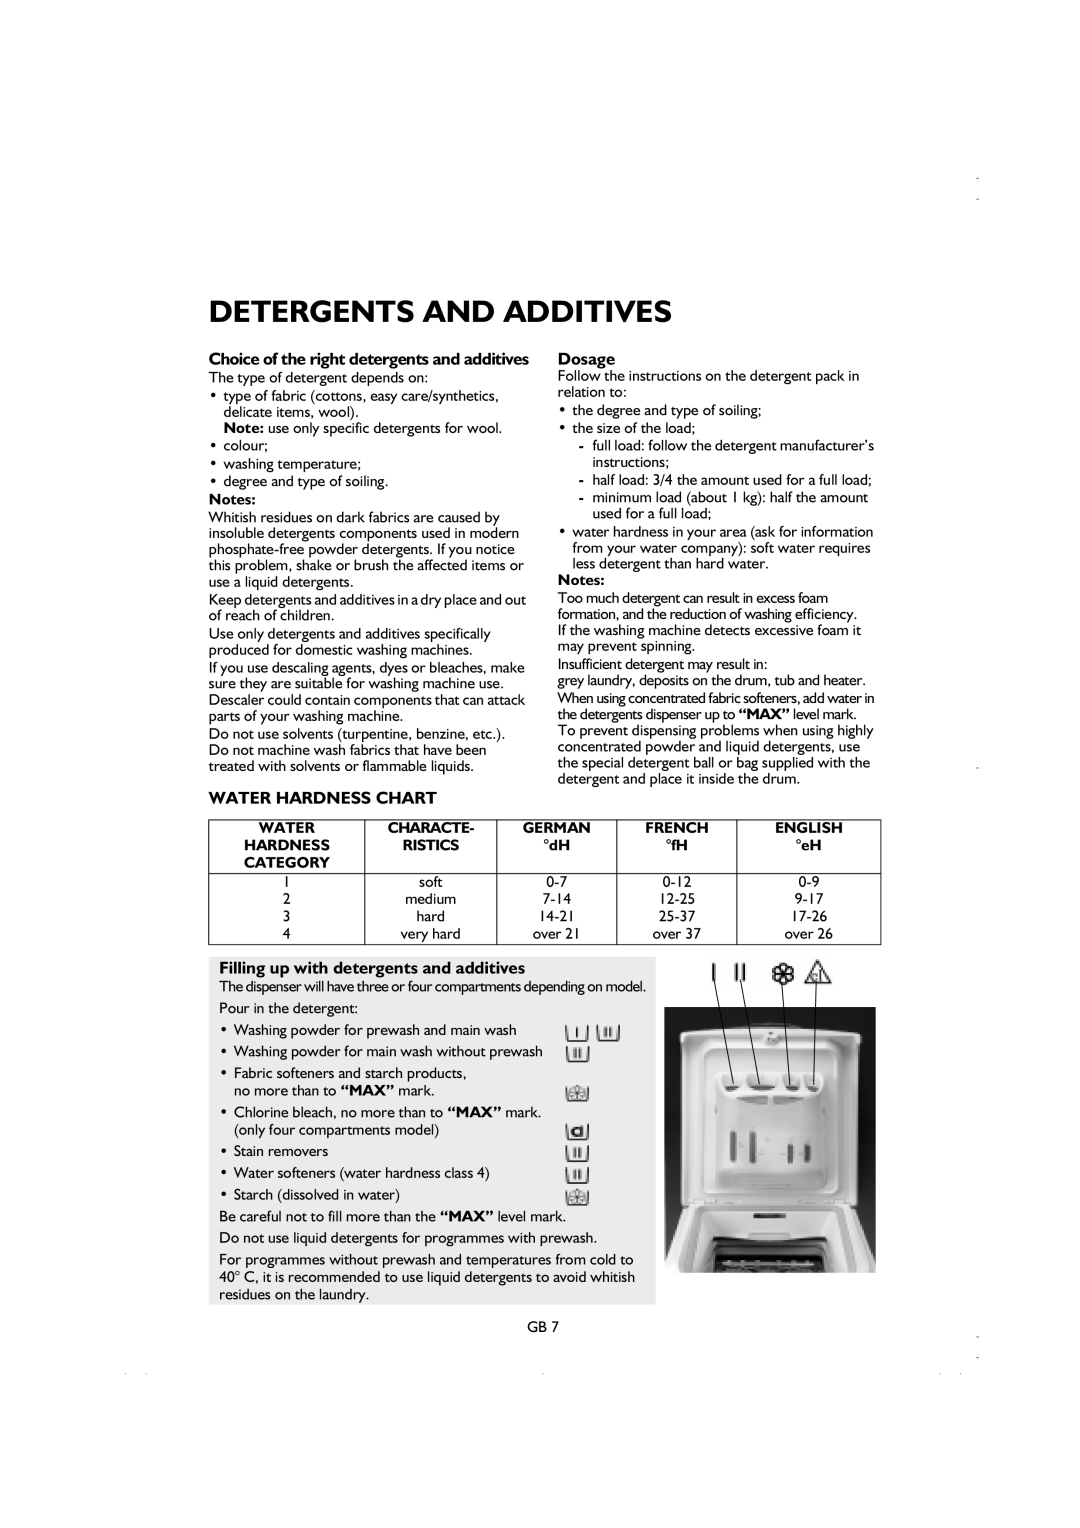 Smeg K600TL1 Detergents And Additives, Dosage, Water Hardness Chart, Filling up with detergents and additives, Characte 